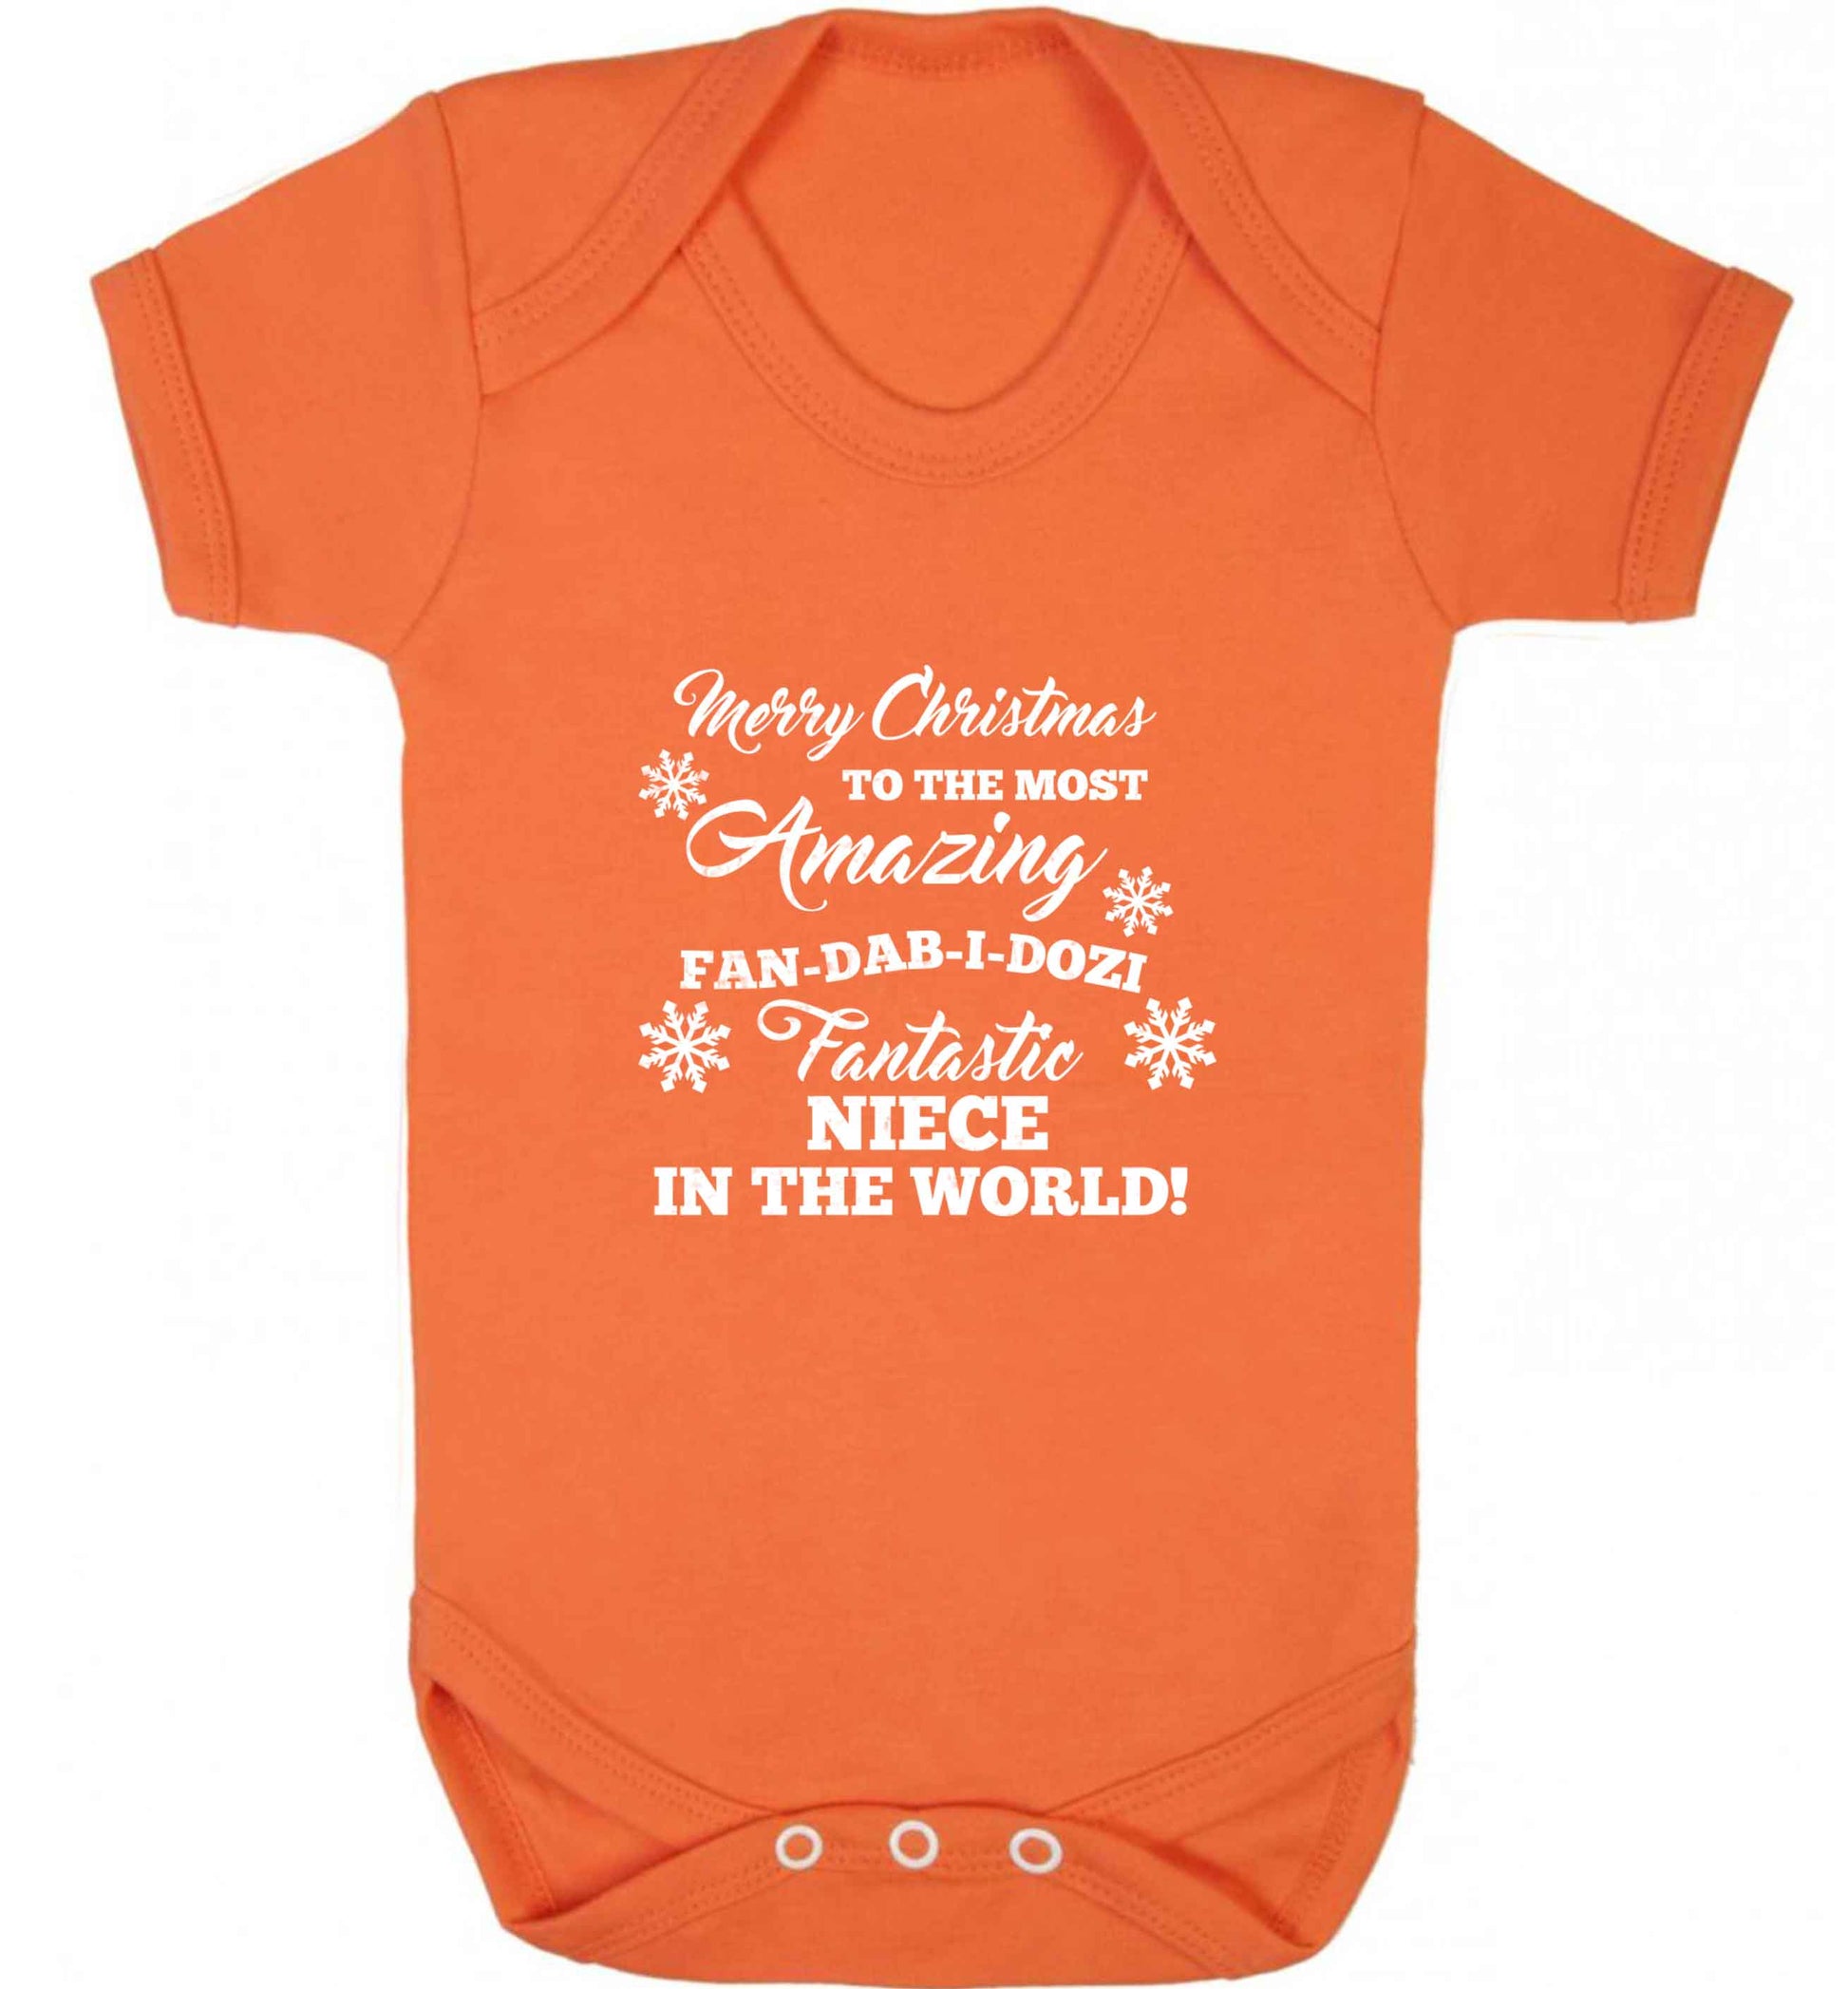 Merry Christmas to the most amazing fan-dab-i-dozi fantasic Niece in the world baby vest orange 18-24 months